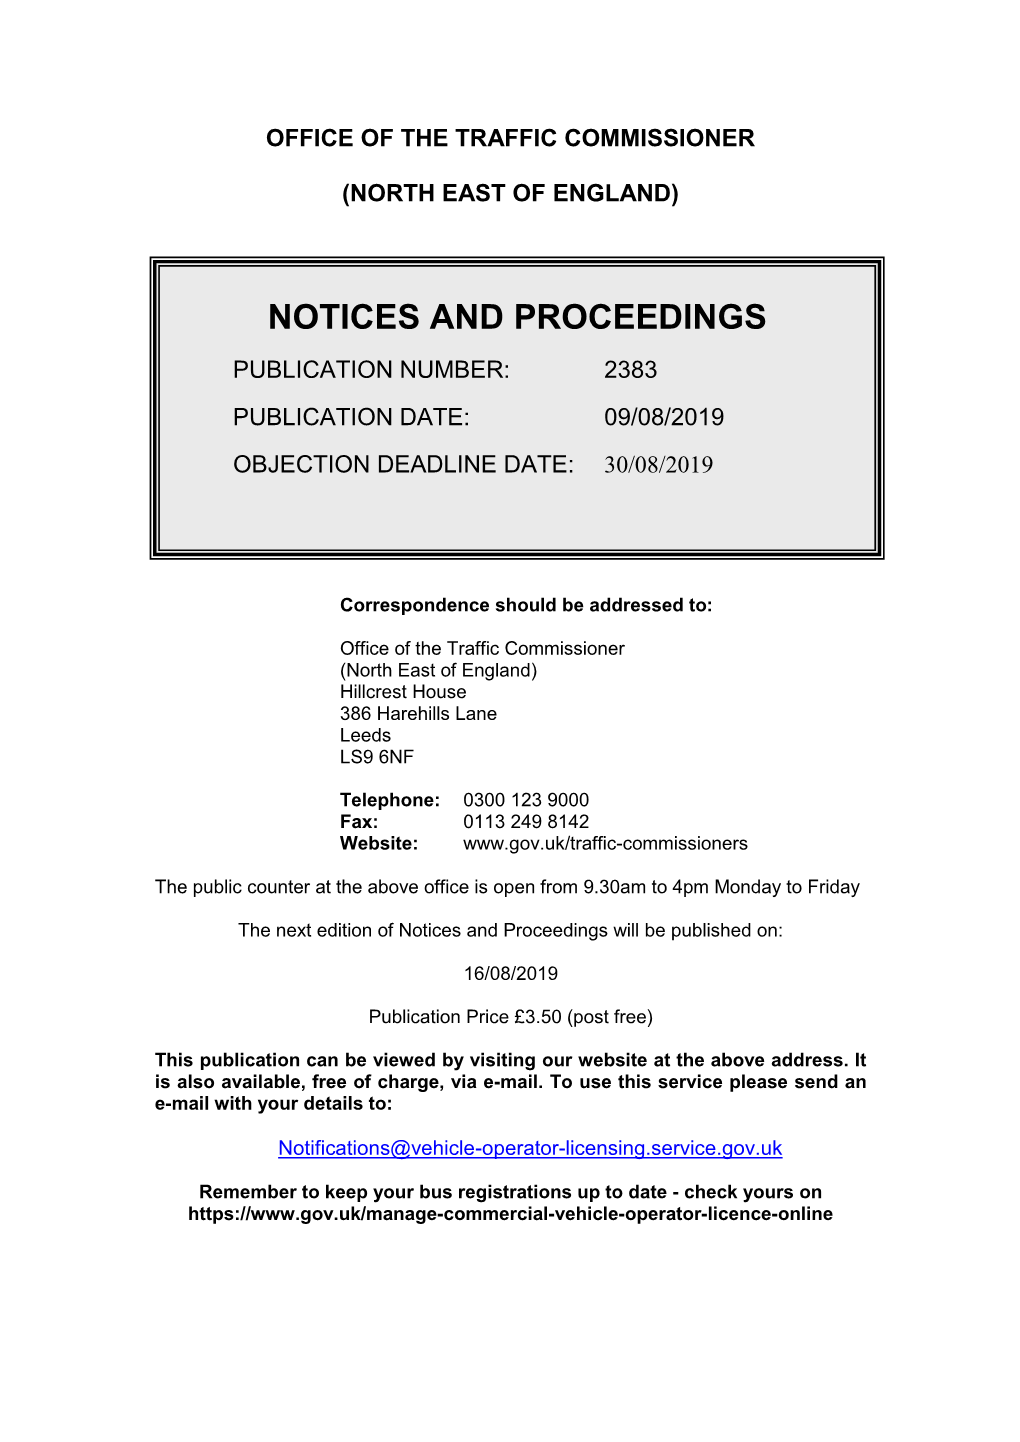 Notcies and Proceedings for the North East of England